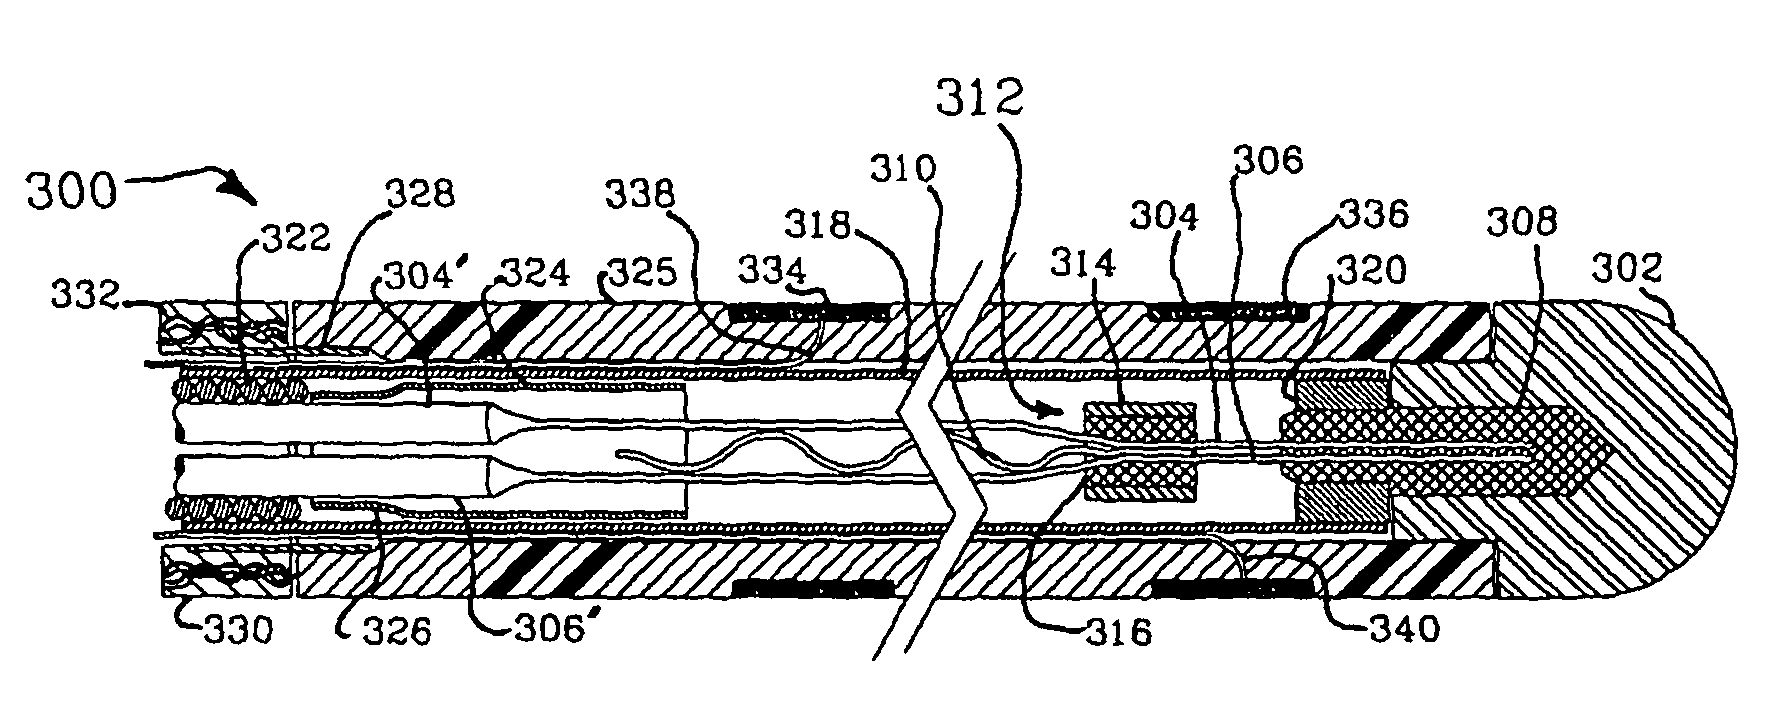 Electrophysiology/ablation catheter and remote actuator therefor